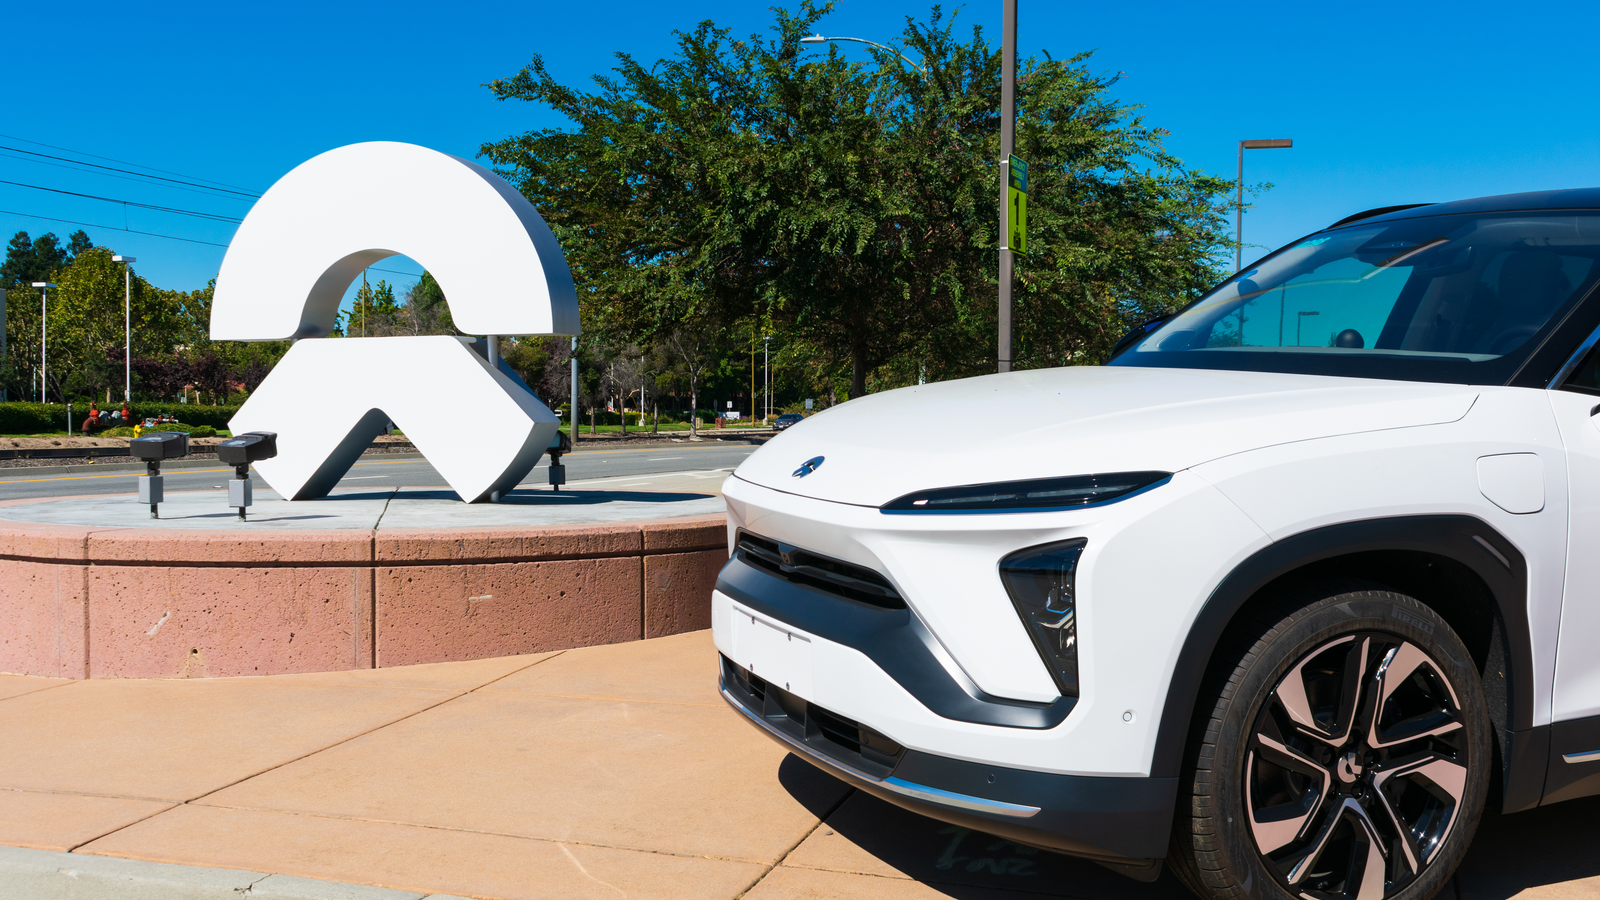 NIO Stock ES6 electric SUV semi-autonomous car on display near Chinese automobile manufacturer NIO software development office in Silicon Valley. Chinese EV companies like NIO are in the news.